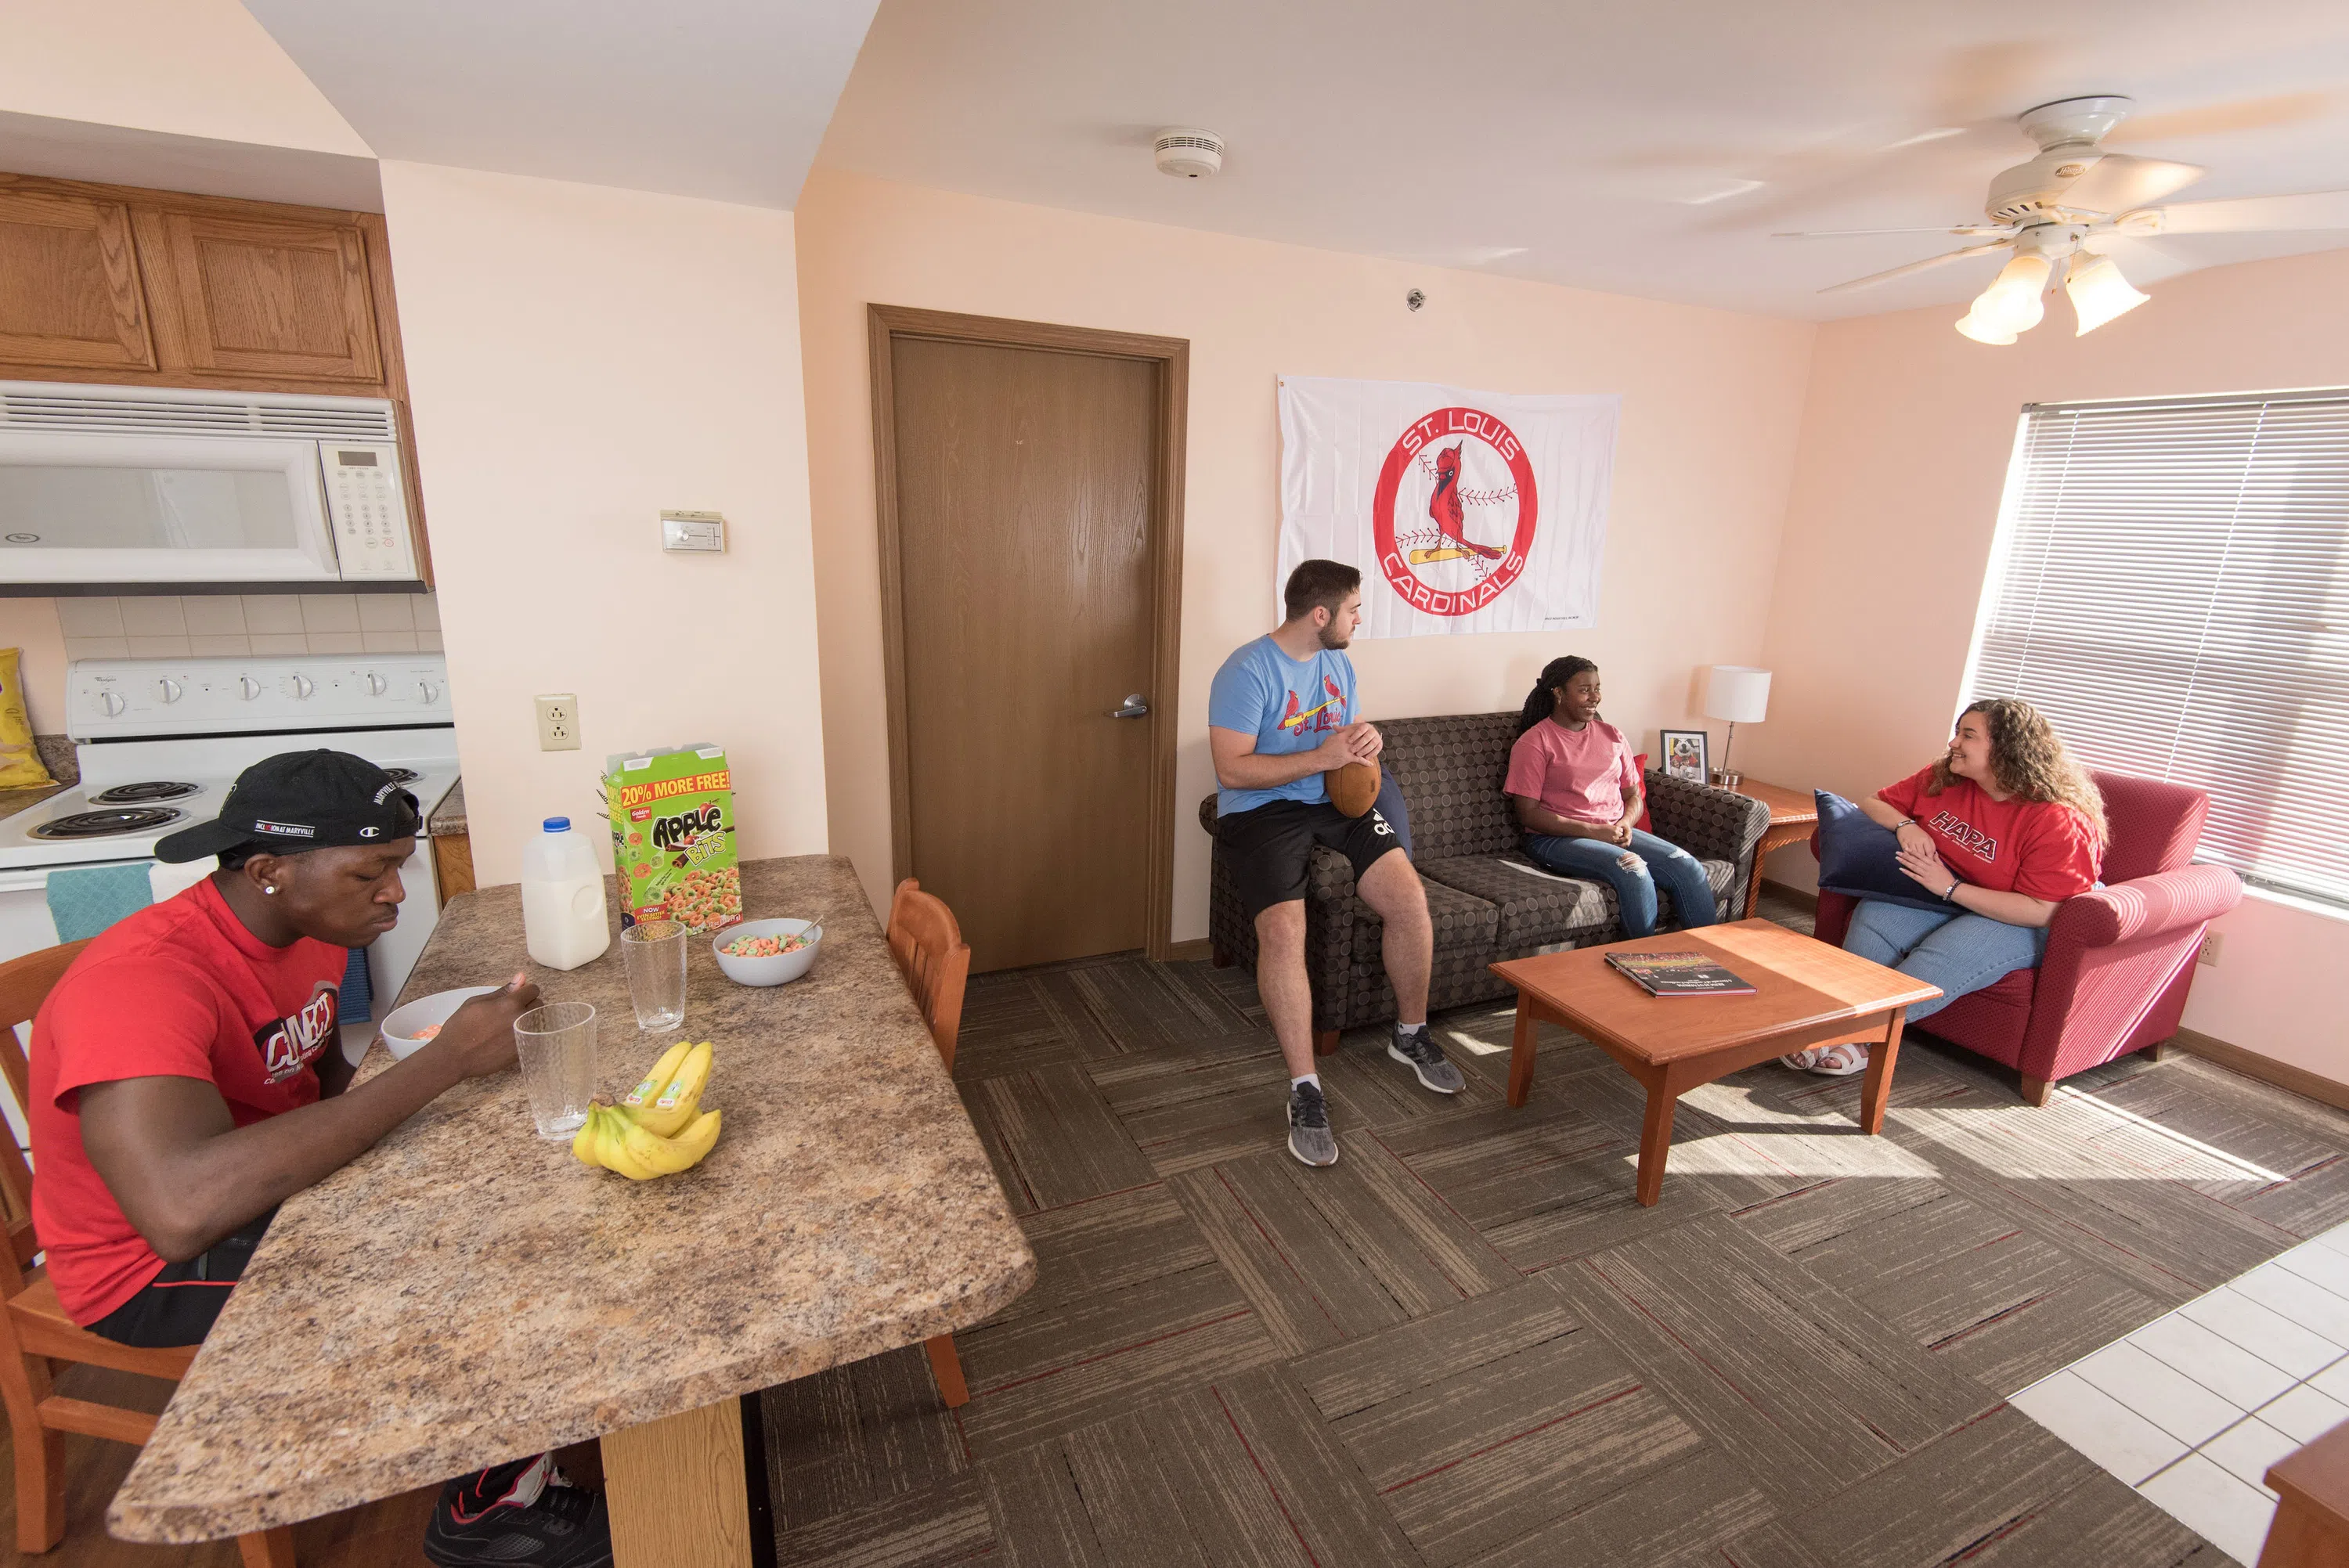 Students hang out together in an on-campus apartment. Some sit on a couch, watching TV and talking. Another student sits at the kitchen counter to eat.